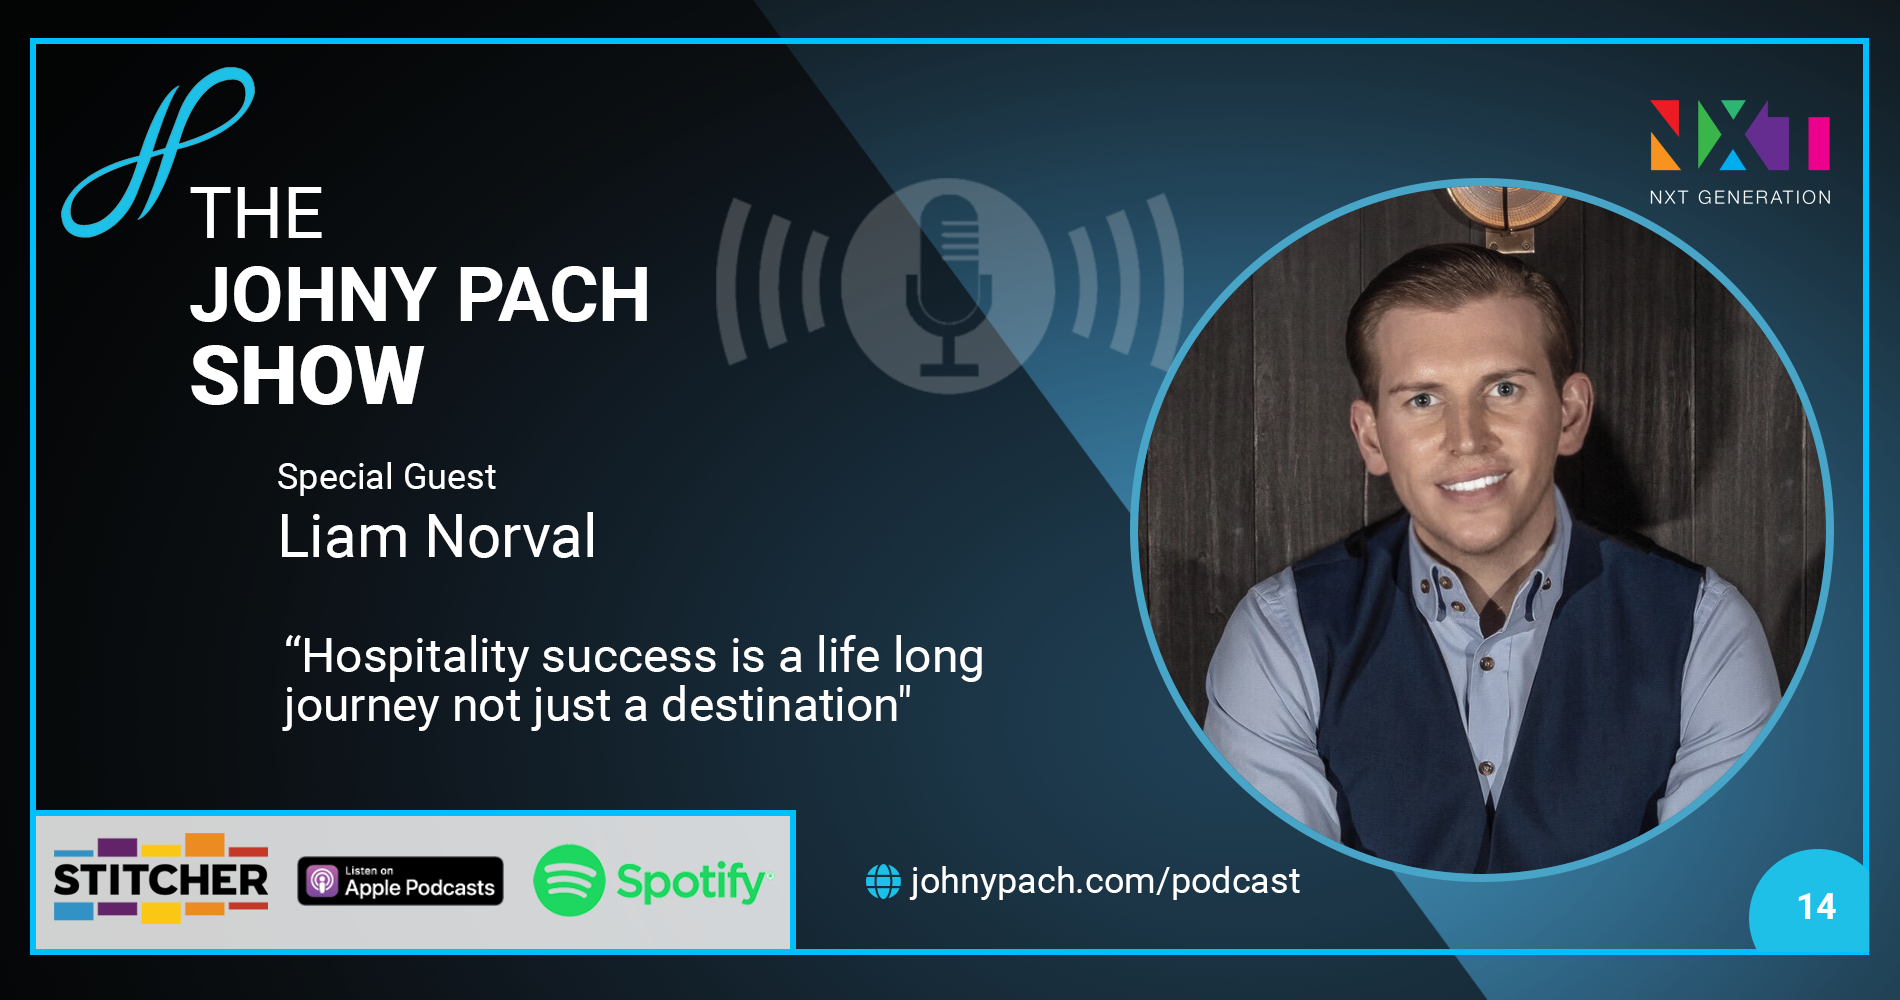 //johnypach.com/wp-content/uploads/2020/06/Podcast-LiamNorval-ep14-1900x1000-1.png